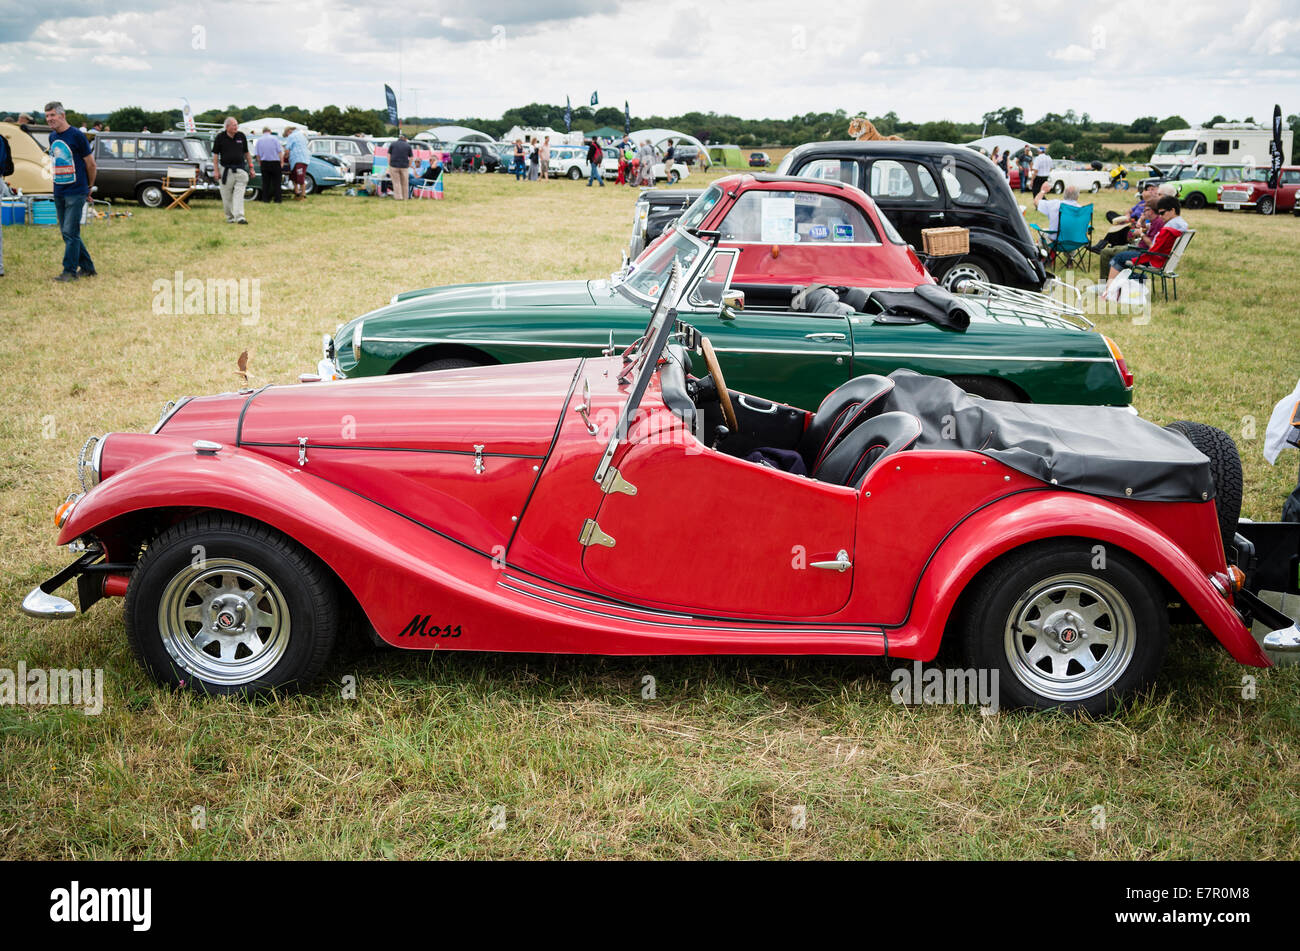 Moss kit-car two-seater sports tourer on show in England Stock Photo